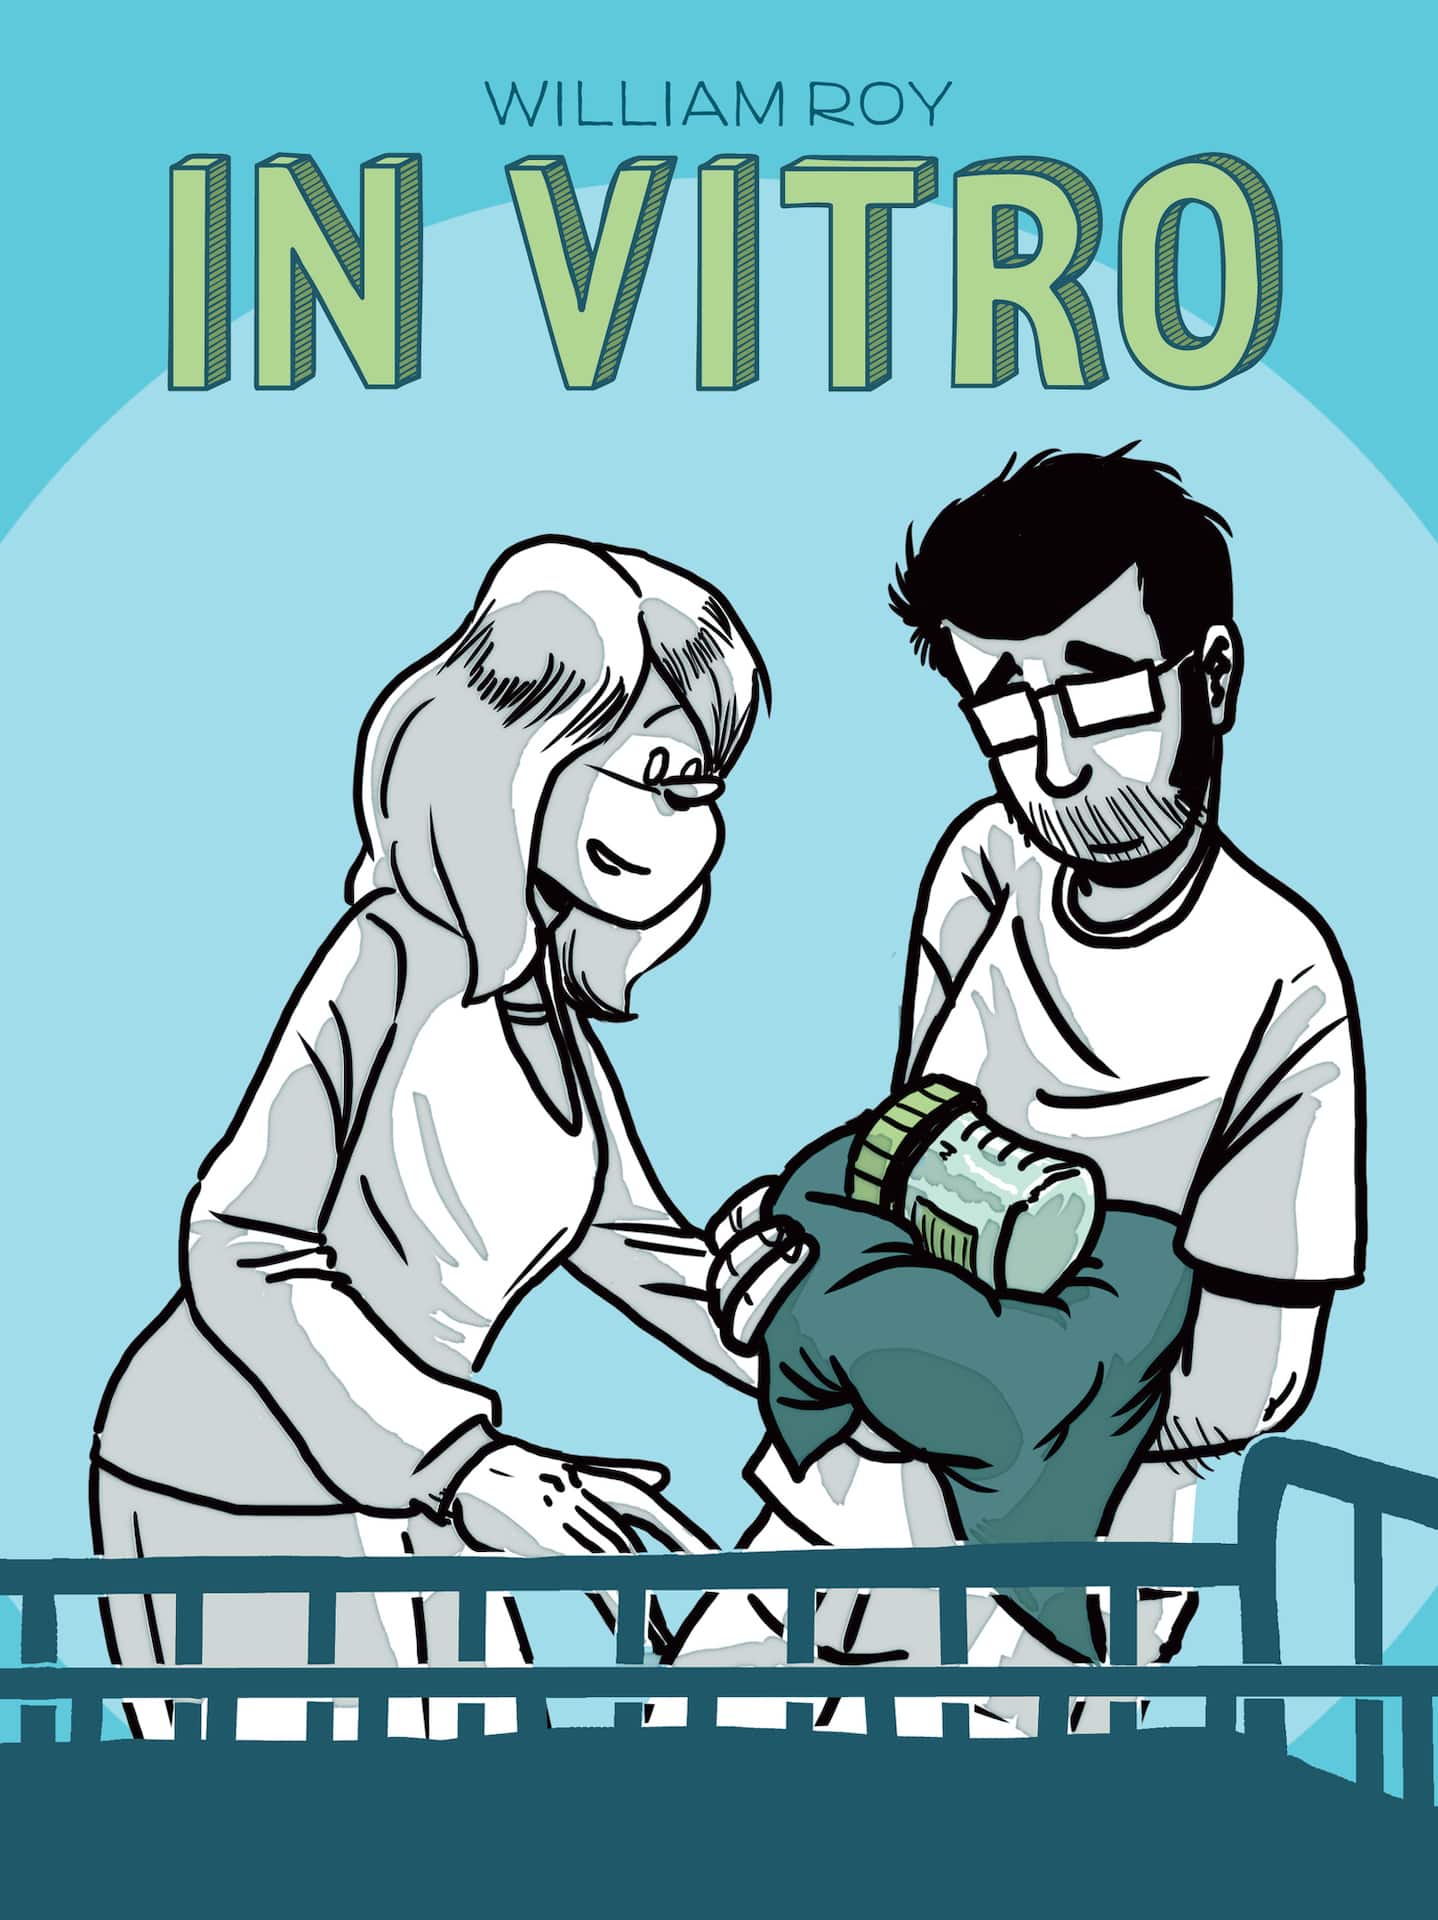 Humanoids publishing 'In Vitro' graphic novel by cartoonist William Roy March 31st